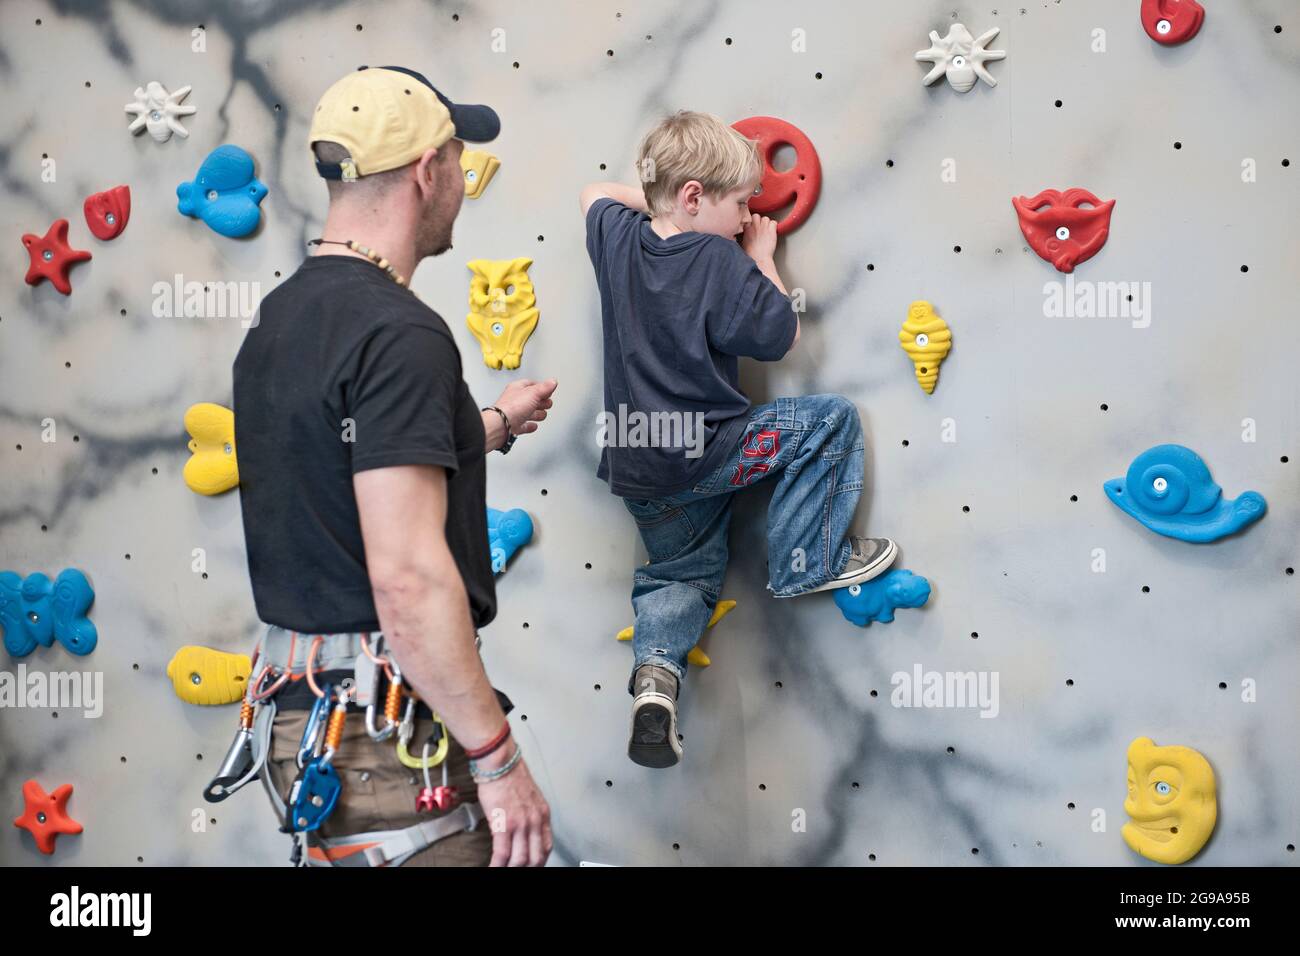 climbing coach assisting young boy on bouldering wall Stock Photo